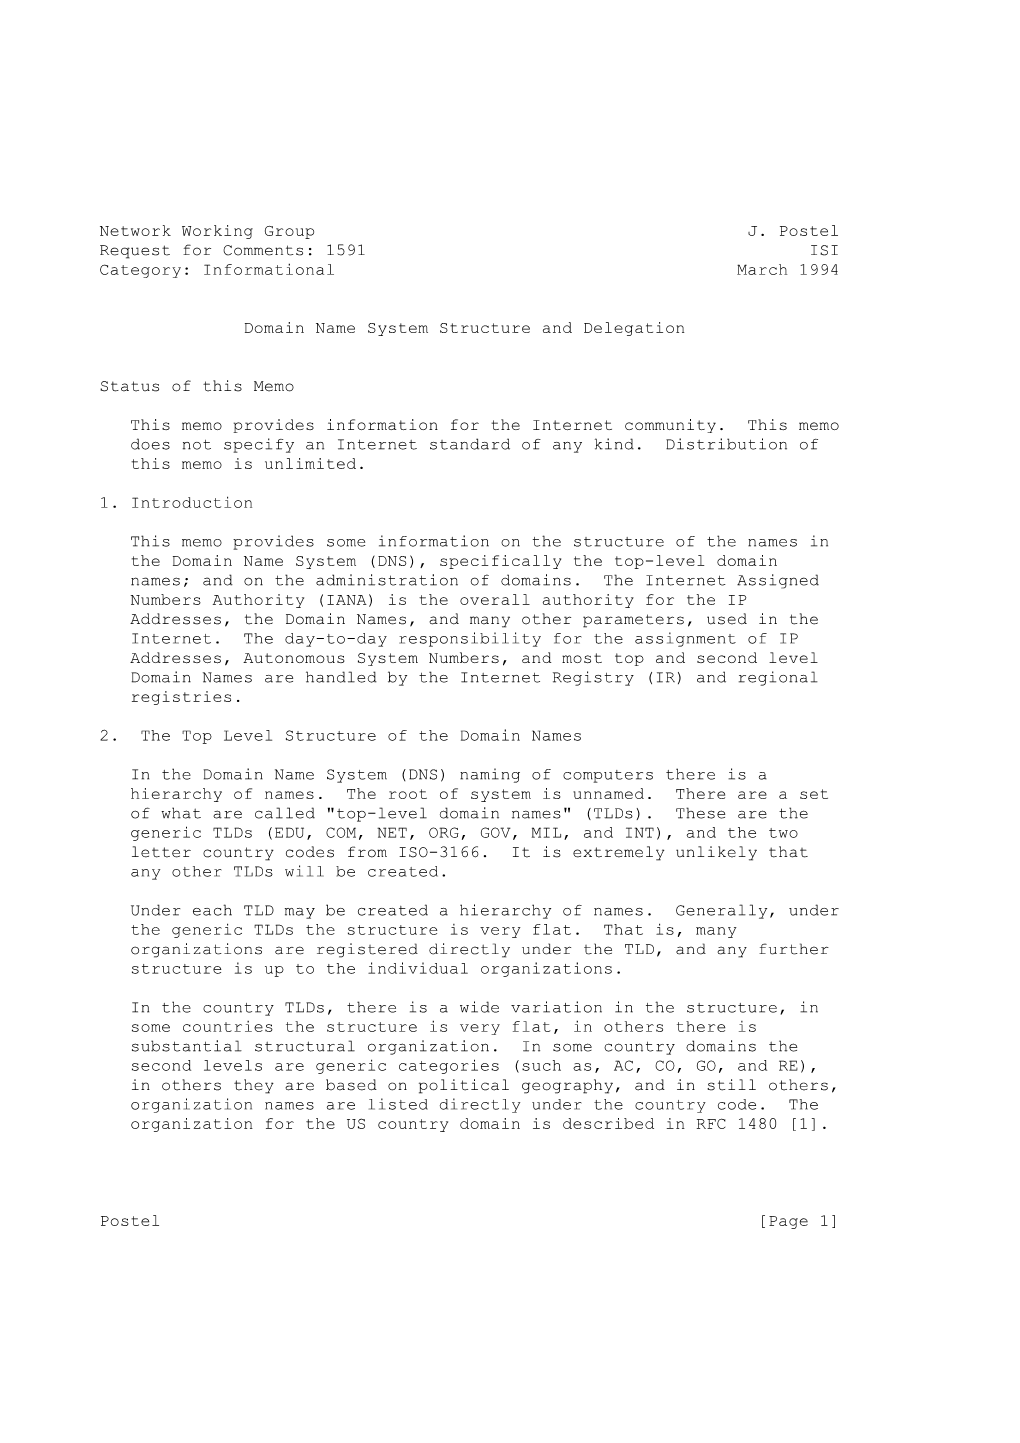 Network Working Group J. Postel Request for Comments: 1591 ISI Category: Informational March 1994